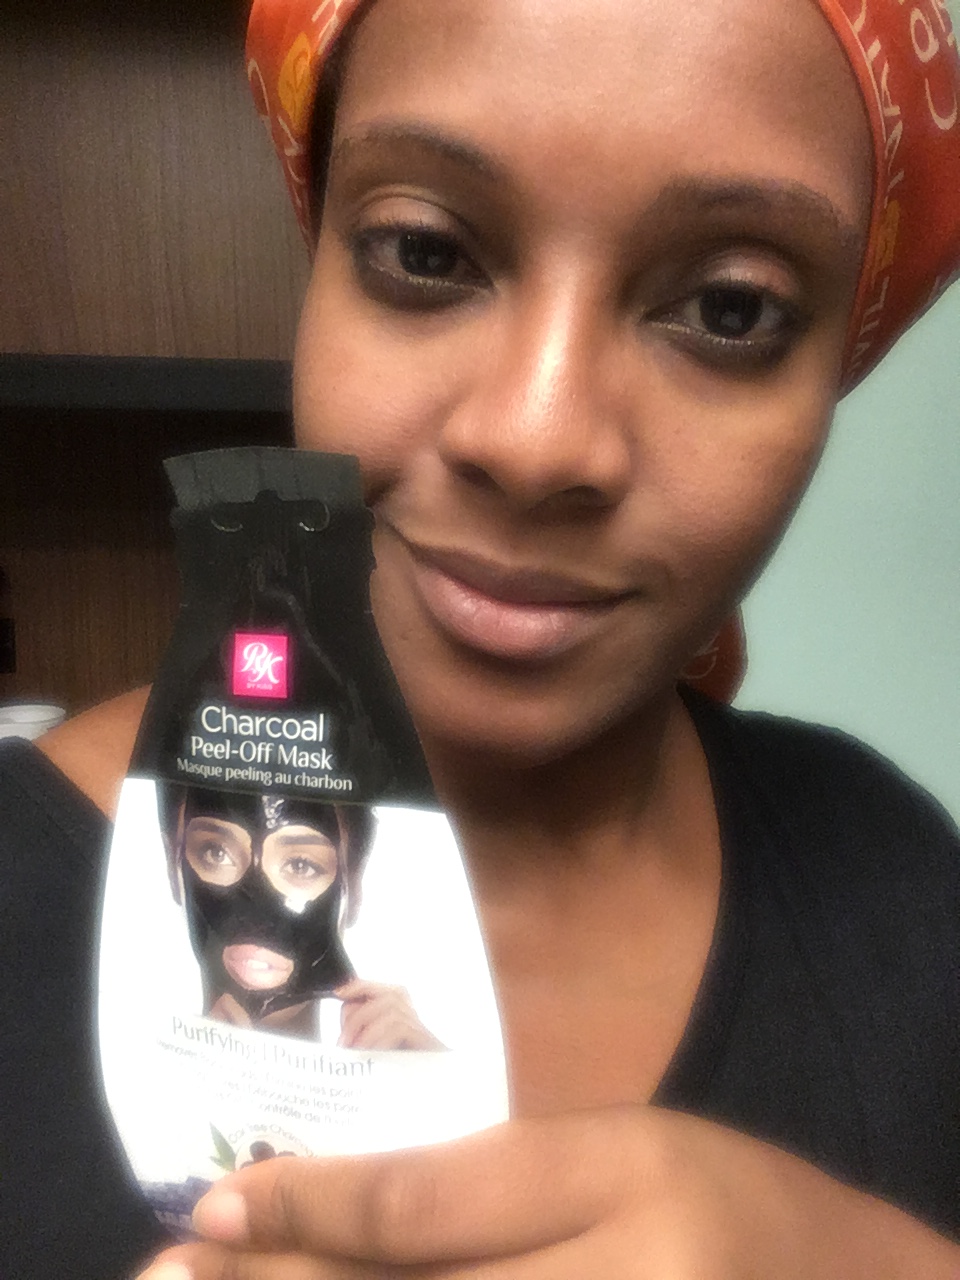 Ruby Kiss Charcoal Peel Off Mask Review | MadameNoire